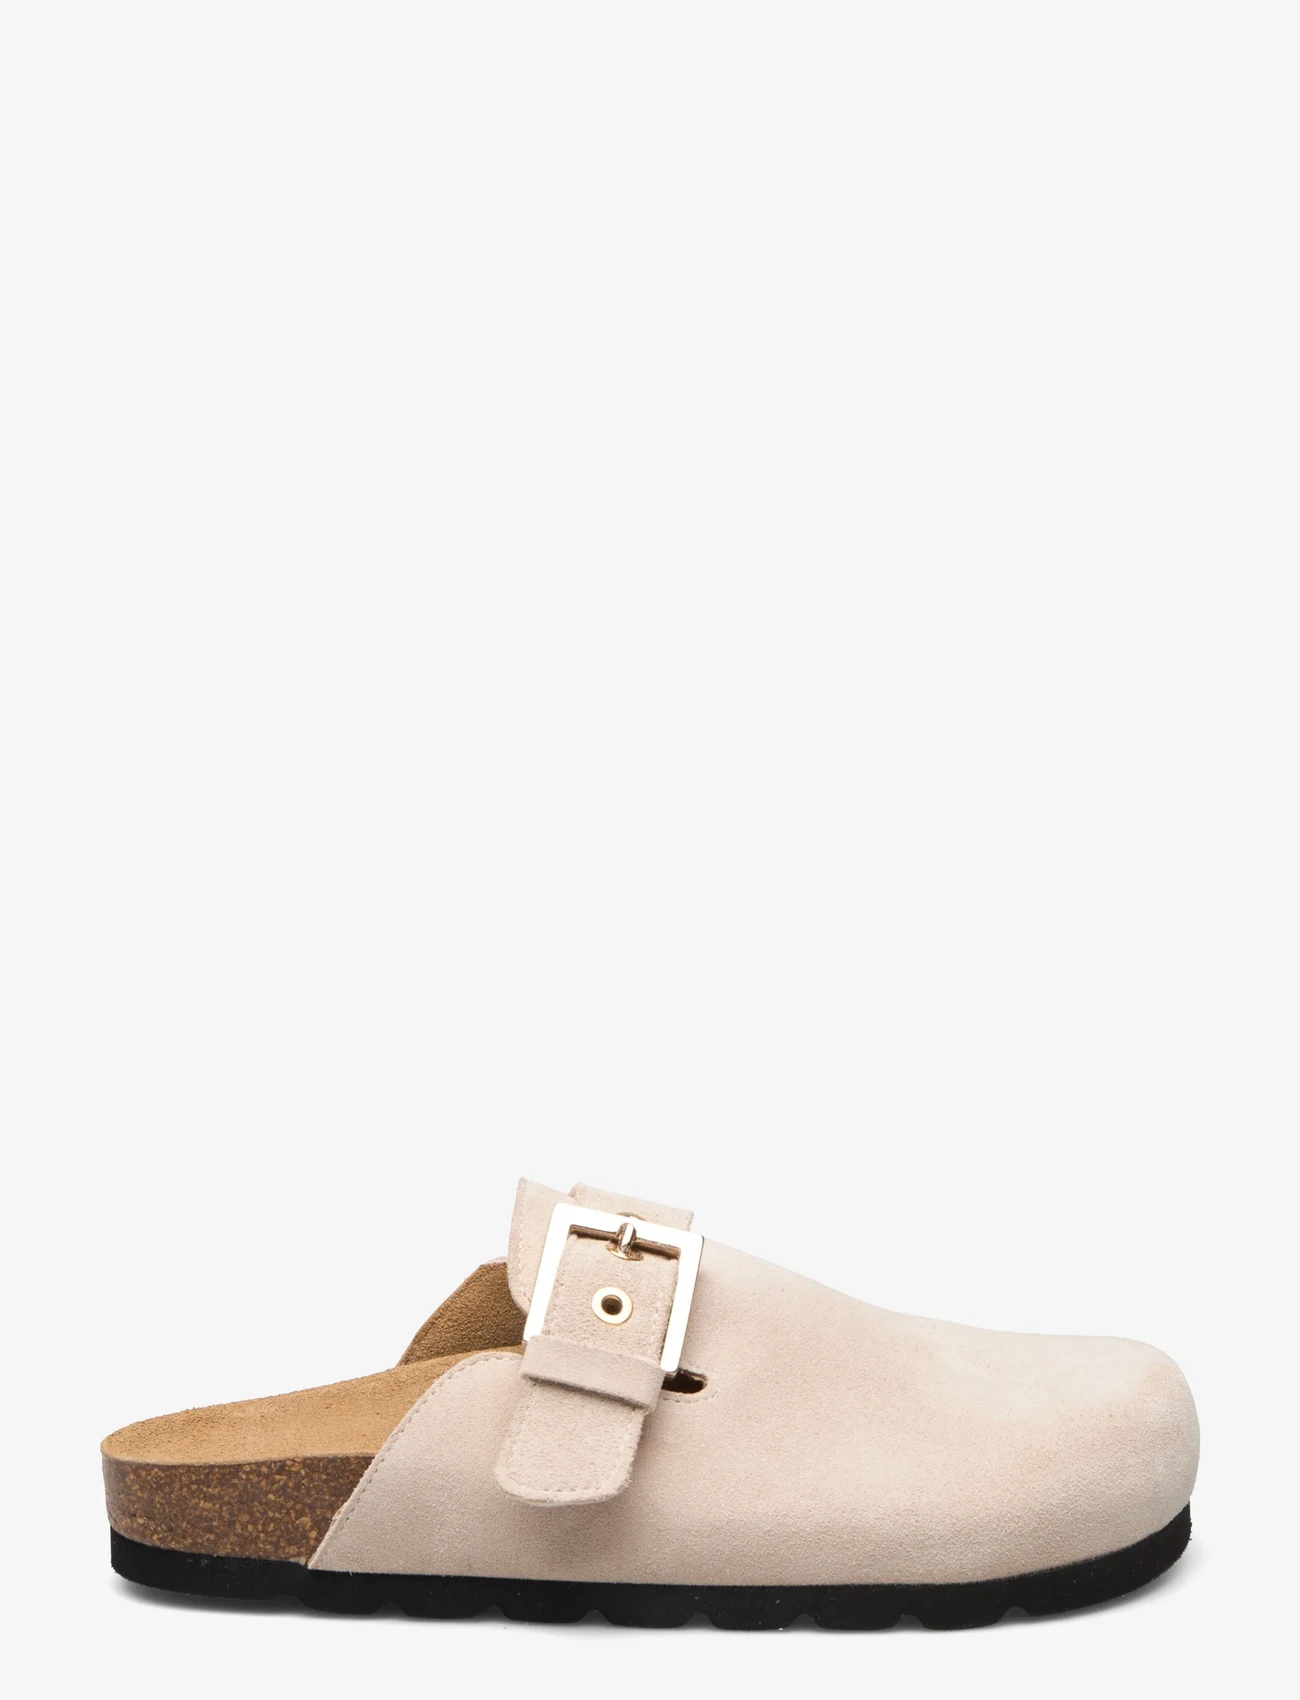 ALOHAS - Cozy Suede Taupe Leather Clogs - flat mules - beige - 1